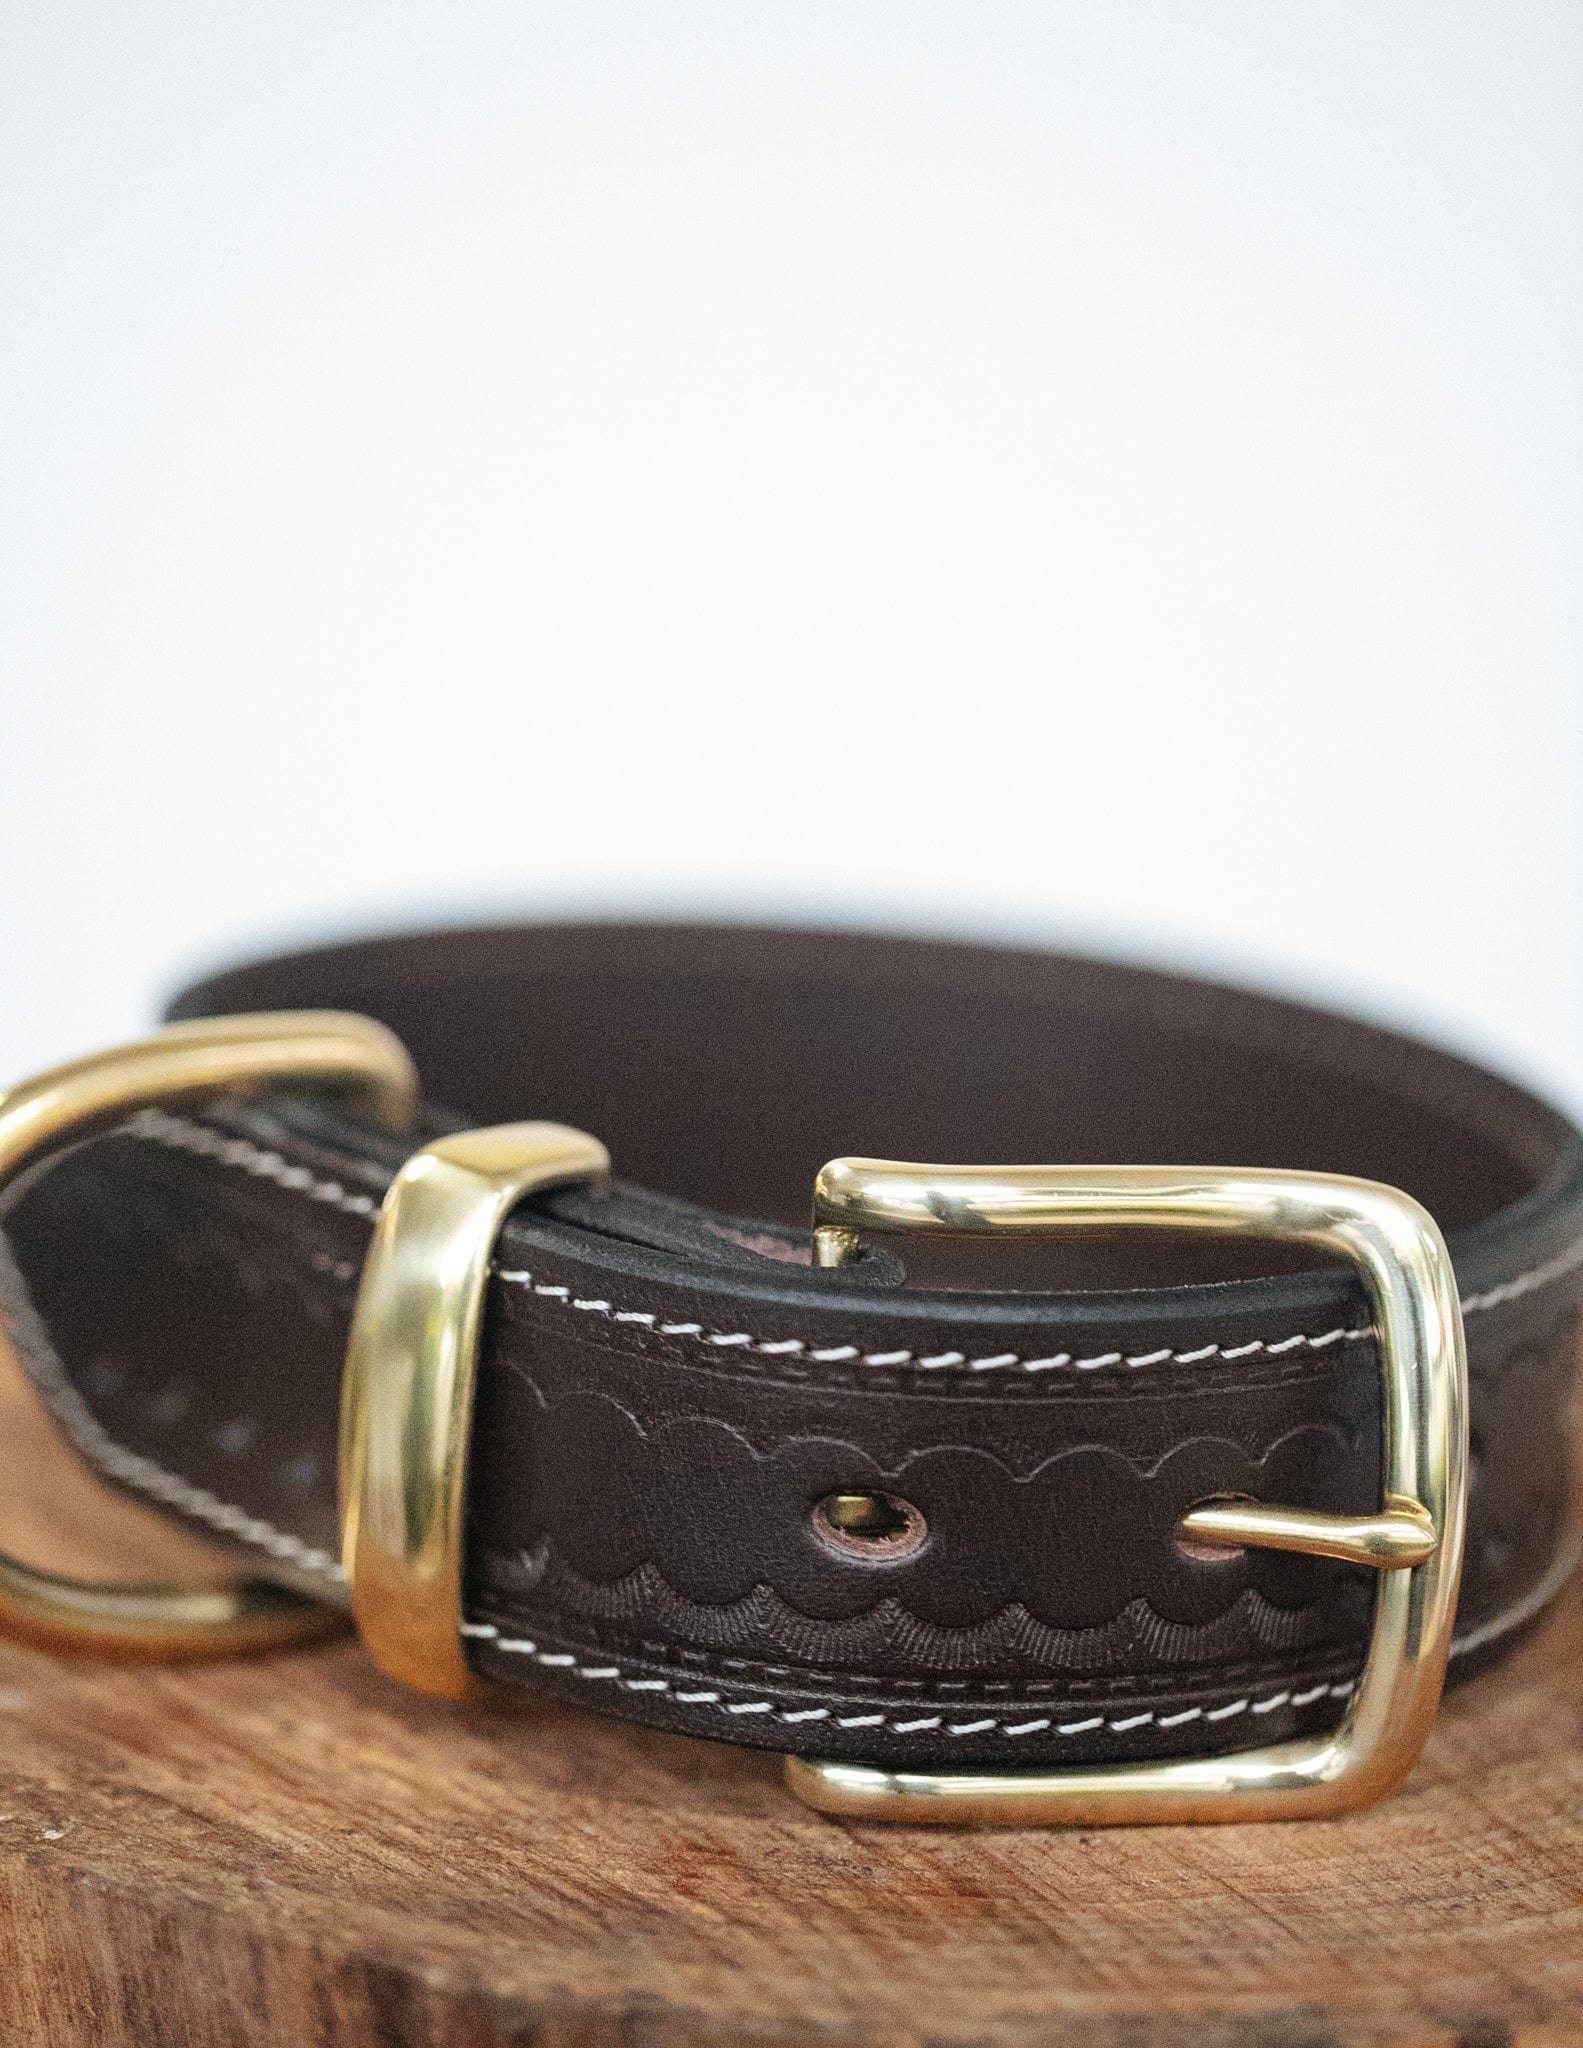 The Real McCaul Leathergoods Pet Collars & Harnesses Deluxe Rancher Dog Collar - 38mm - Dark Brown Australian Made Australian Owned Leather Dog Collar with Brass Fittings- Australian Made